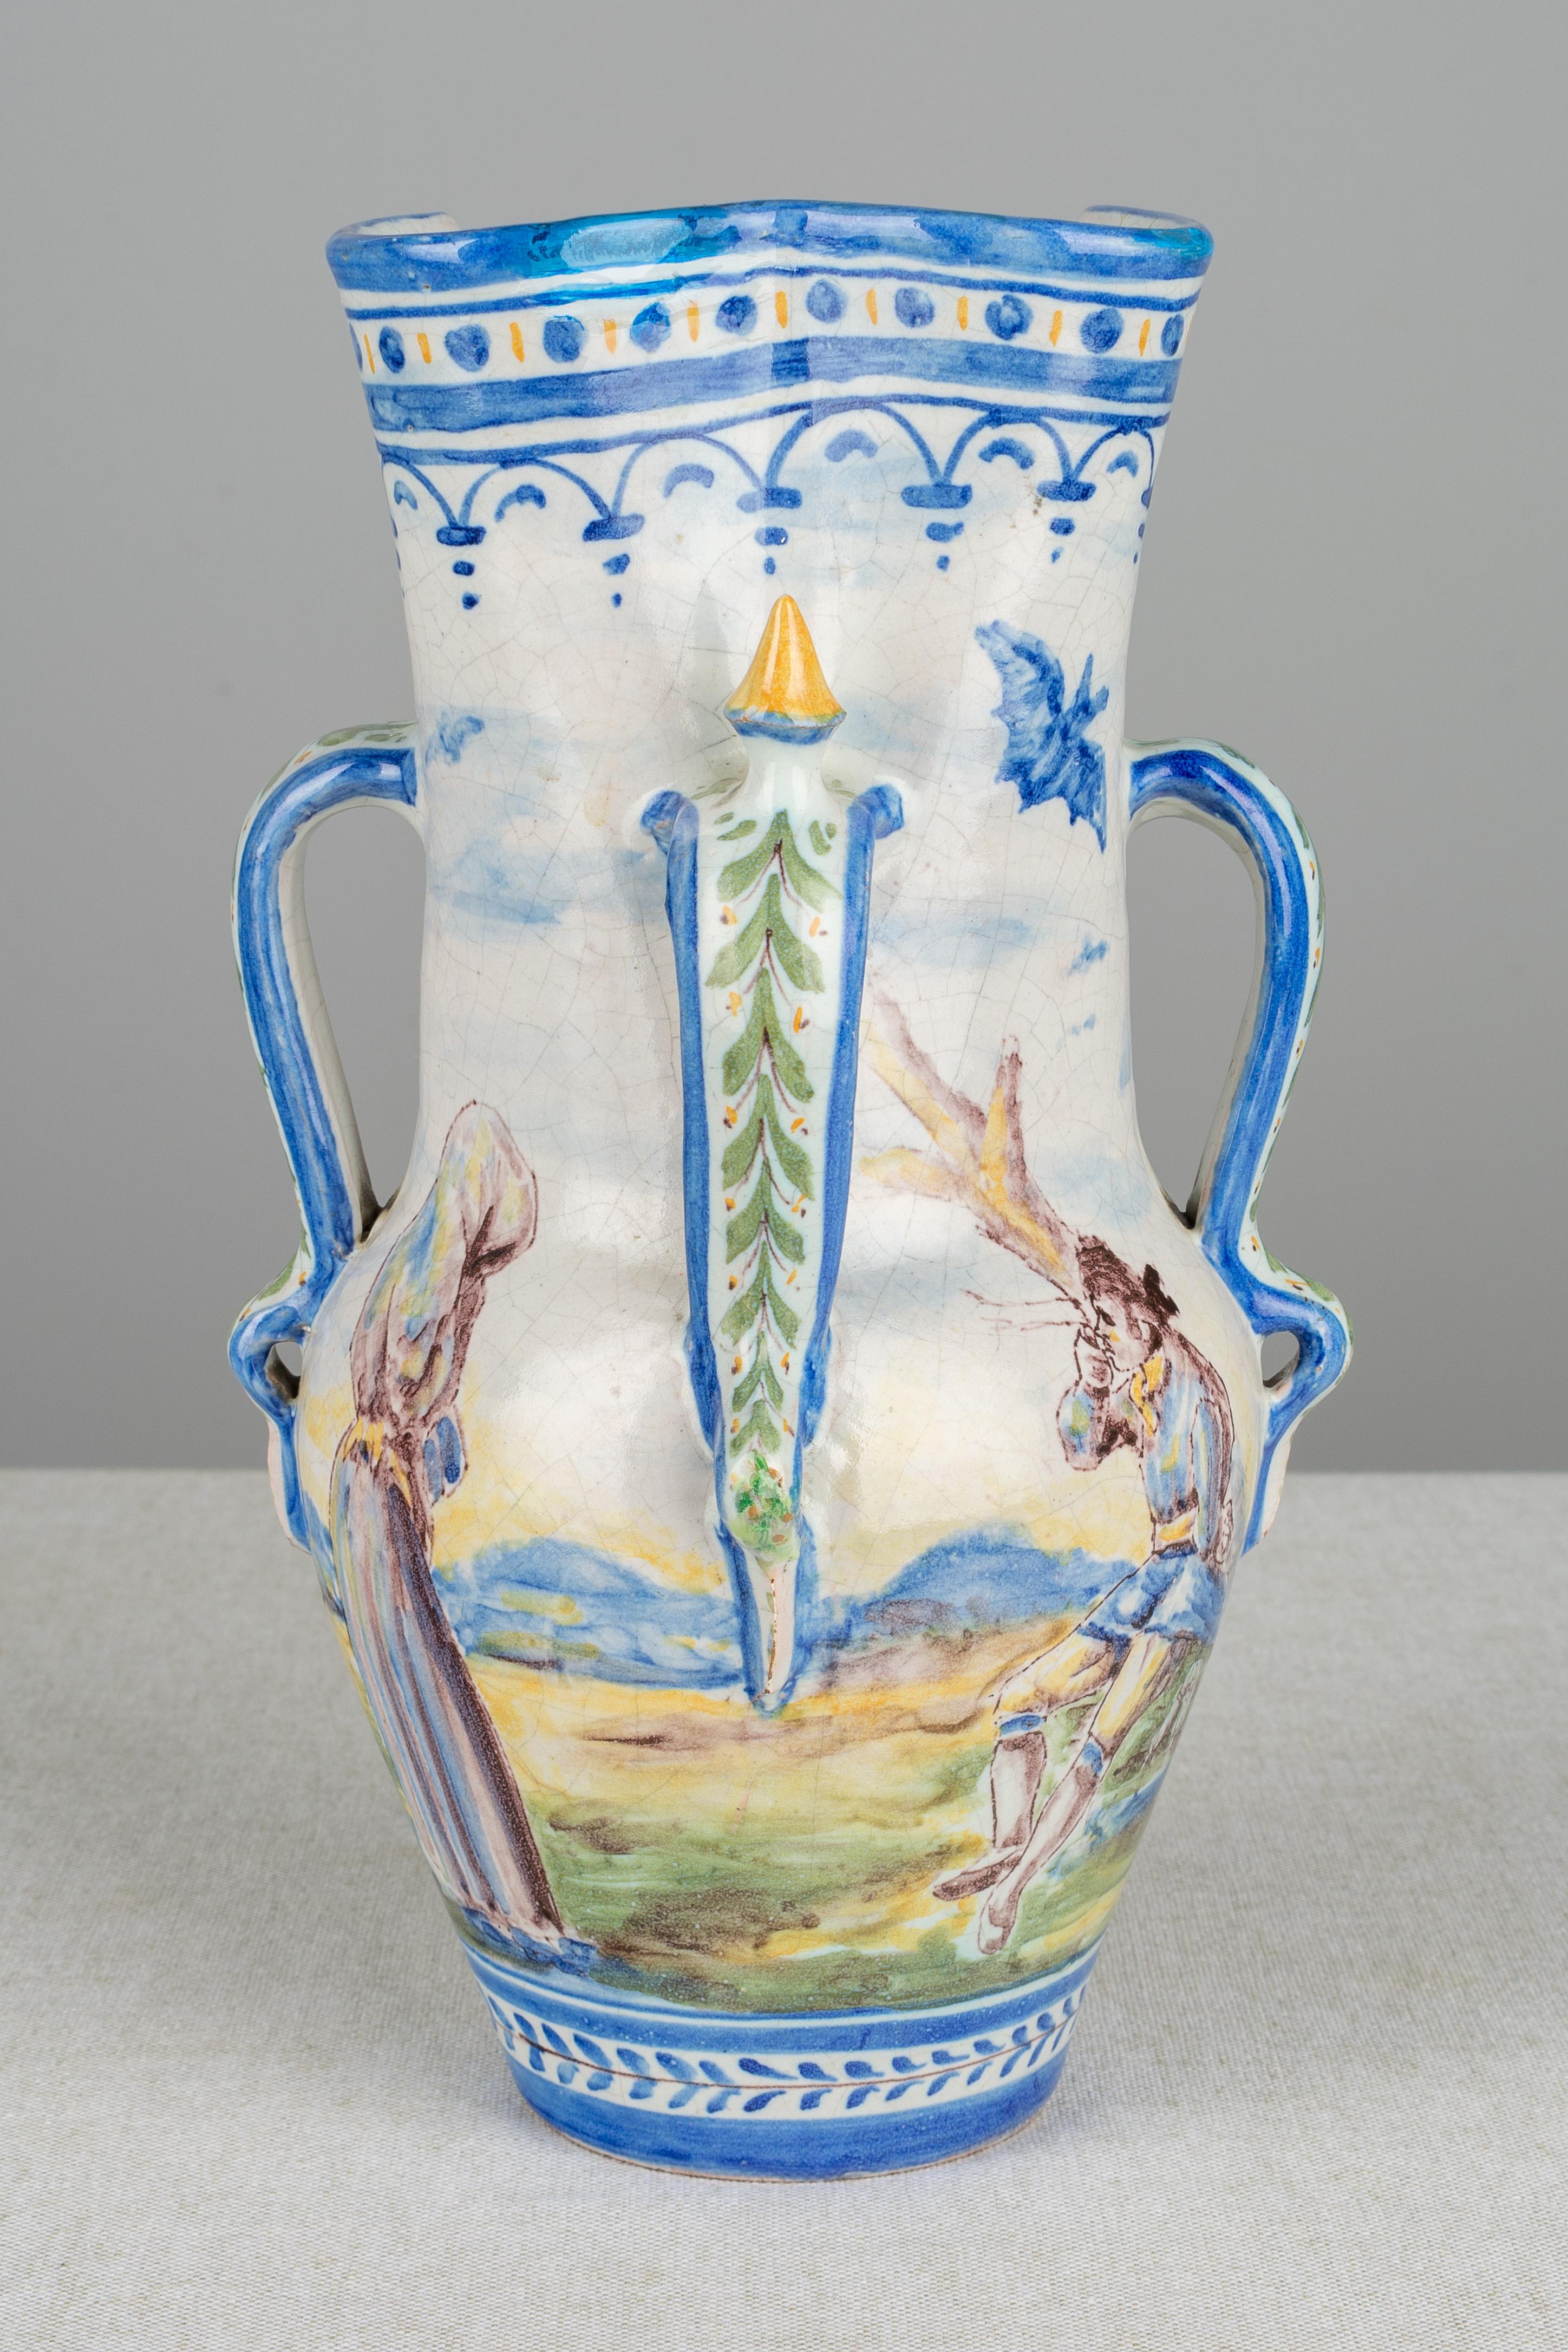 A 19th century Spanish faience vase, or pitcher with four handles. Beautifully hand painted with a central figure in a landscape setting on each of four sides with bats flying overhead. Lovely painterly quality in the depiction of the young maiden